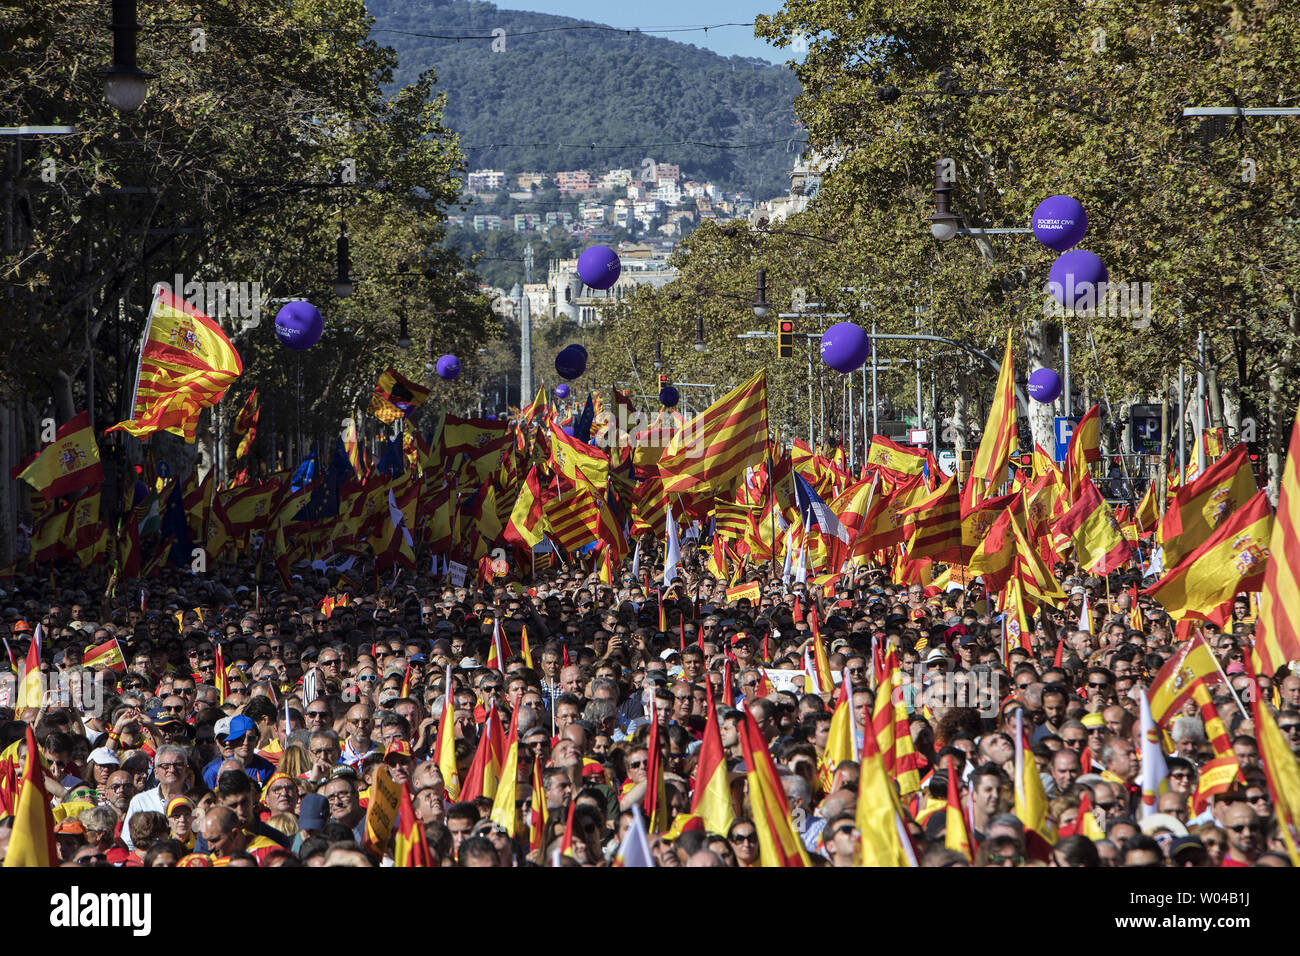 Protesters wave Spanish flags during a pro-unity demonstration in Barcelona on October 29, 2017. Pro-unity protesters were to gather in Catalonia's capital Barcelona, two days after lawmakers voted to split the wealthy region from Spain, plunging the country into an unprecedented political crisis. photo by Xavi Herrero/ UPI Stock Photo